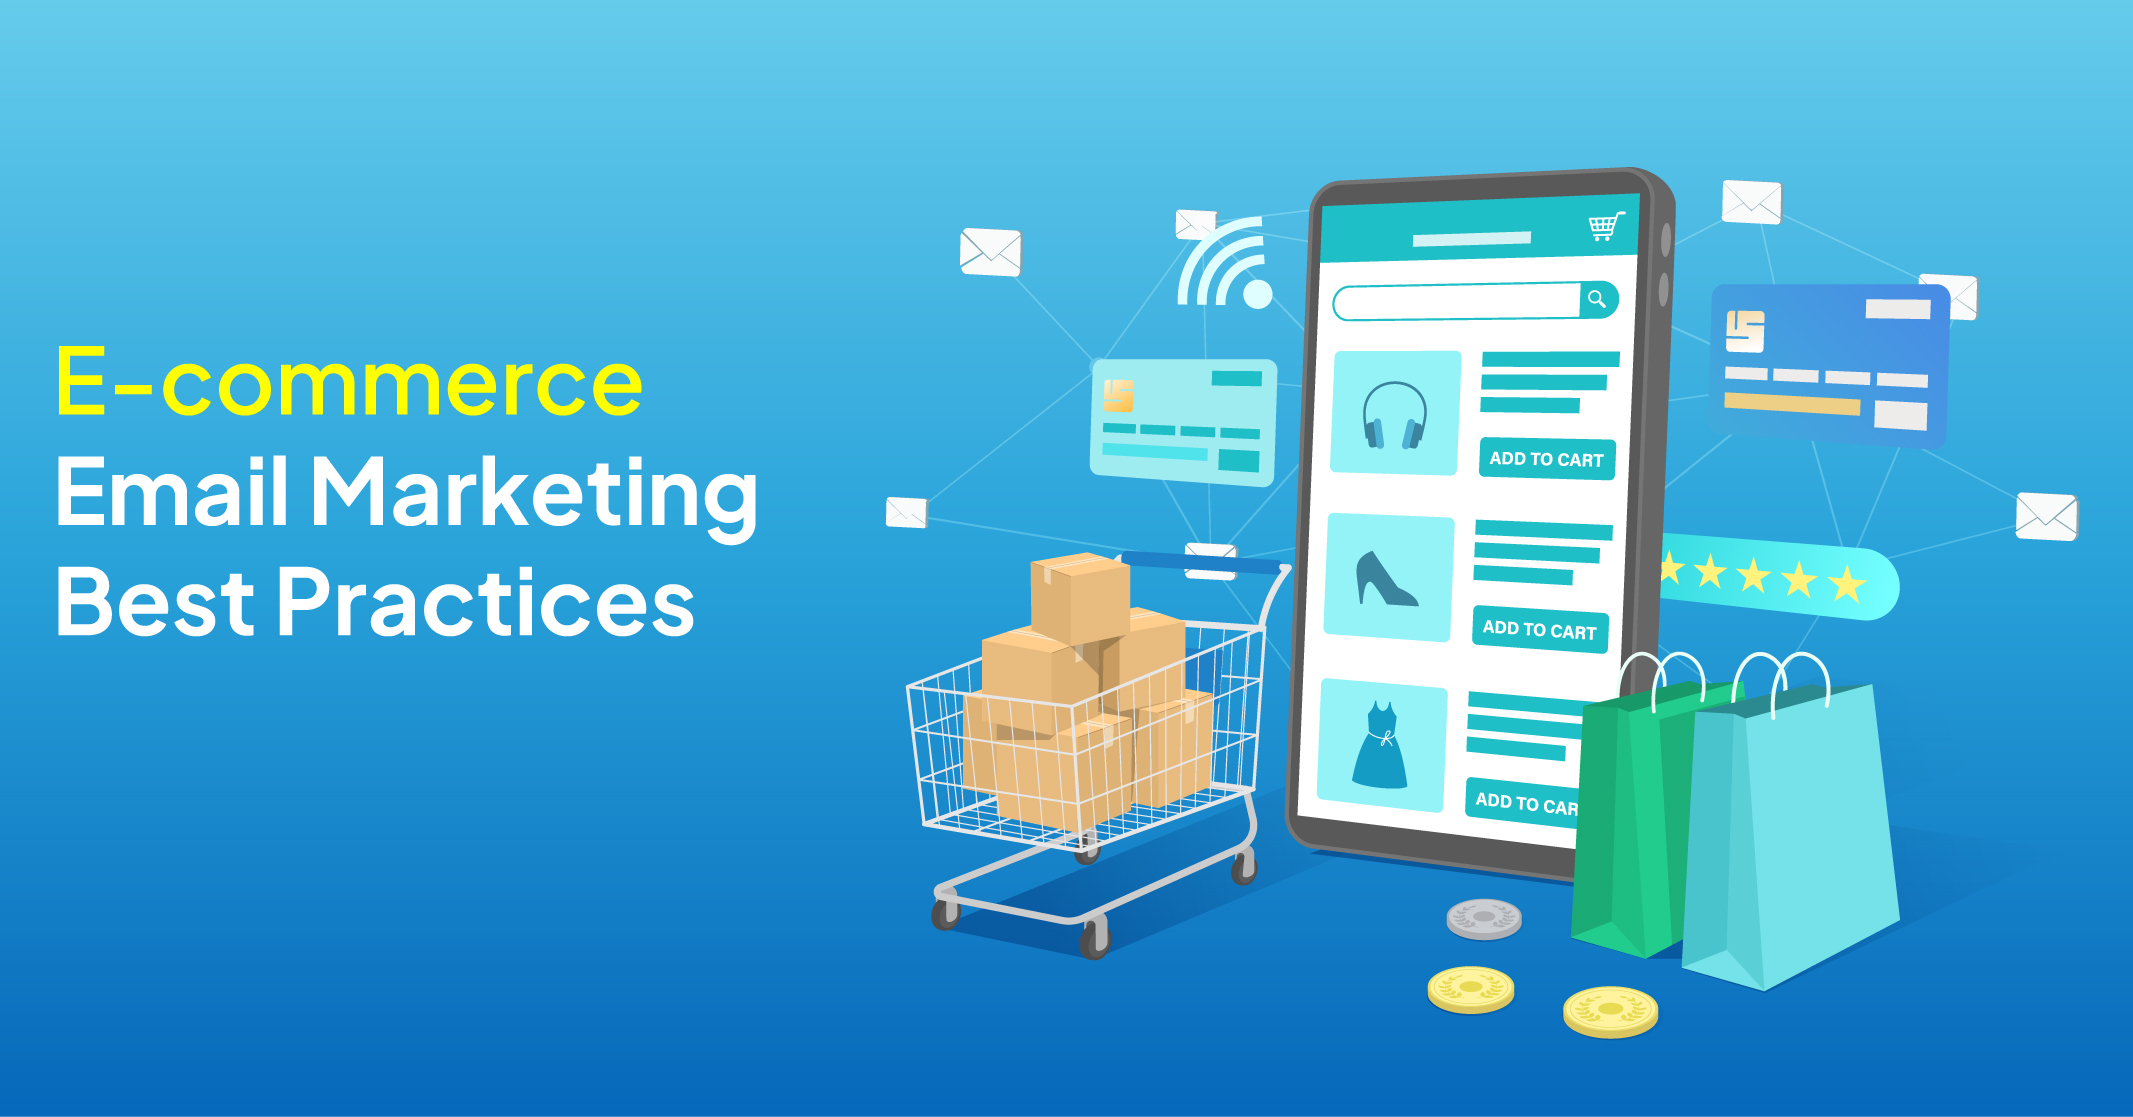 E-commerce Email Marketing Best Practices